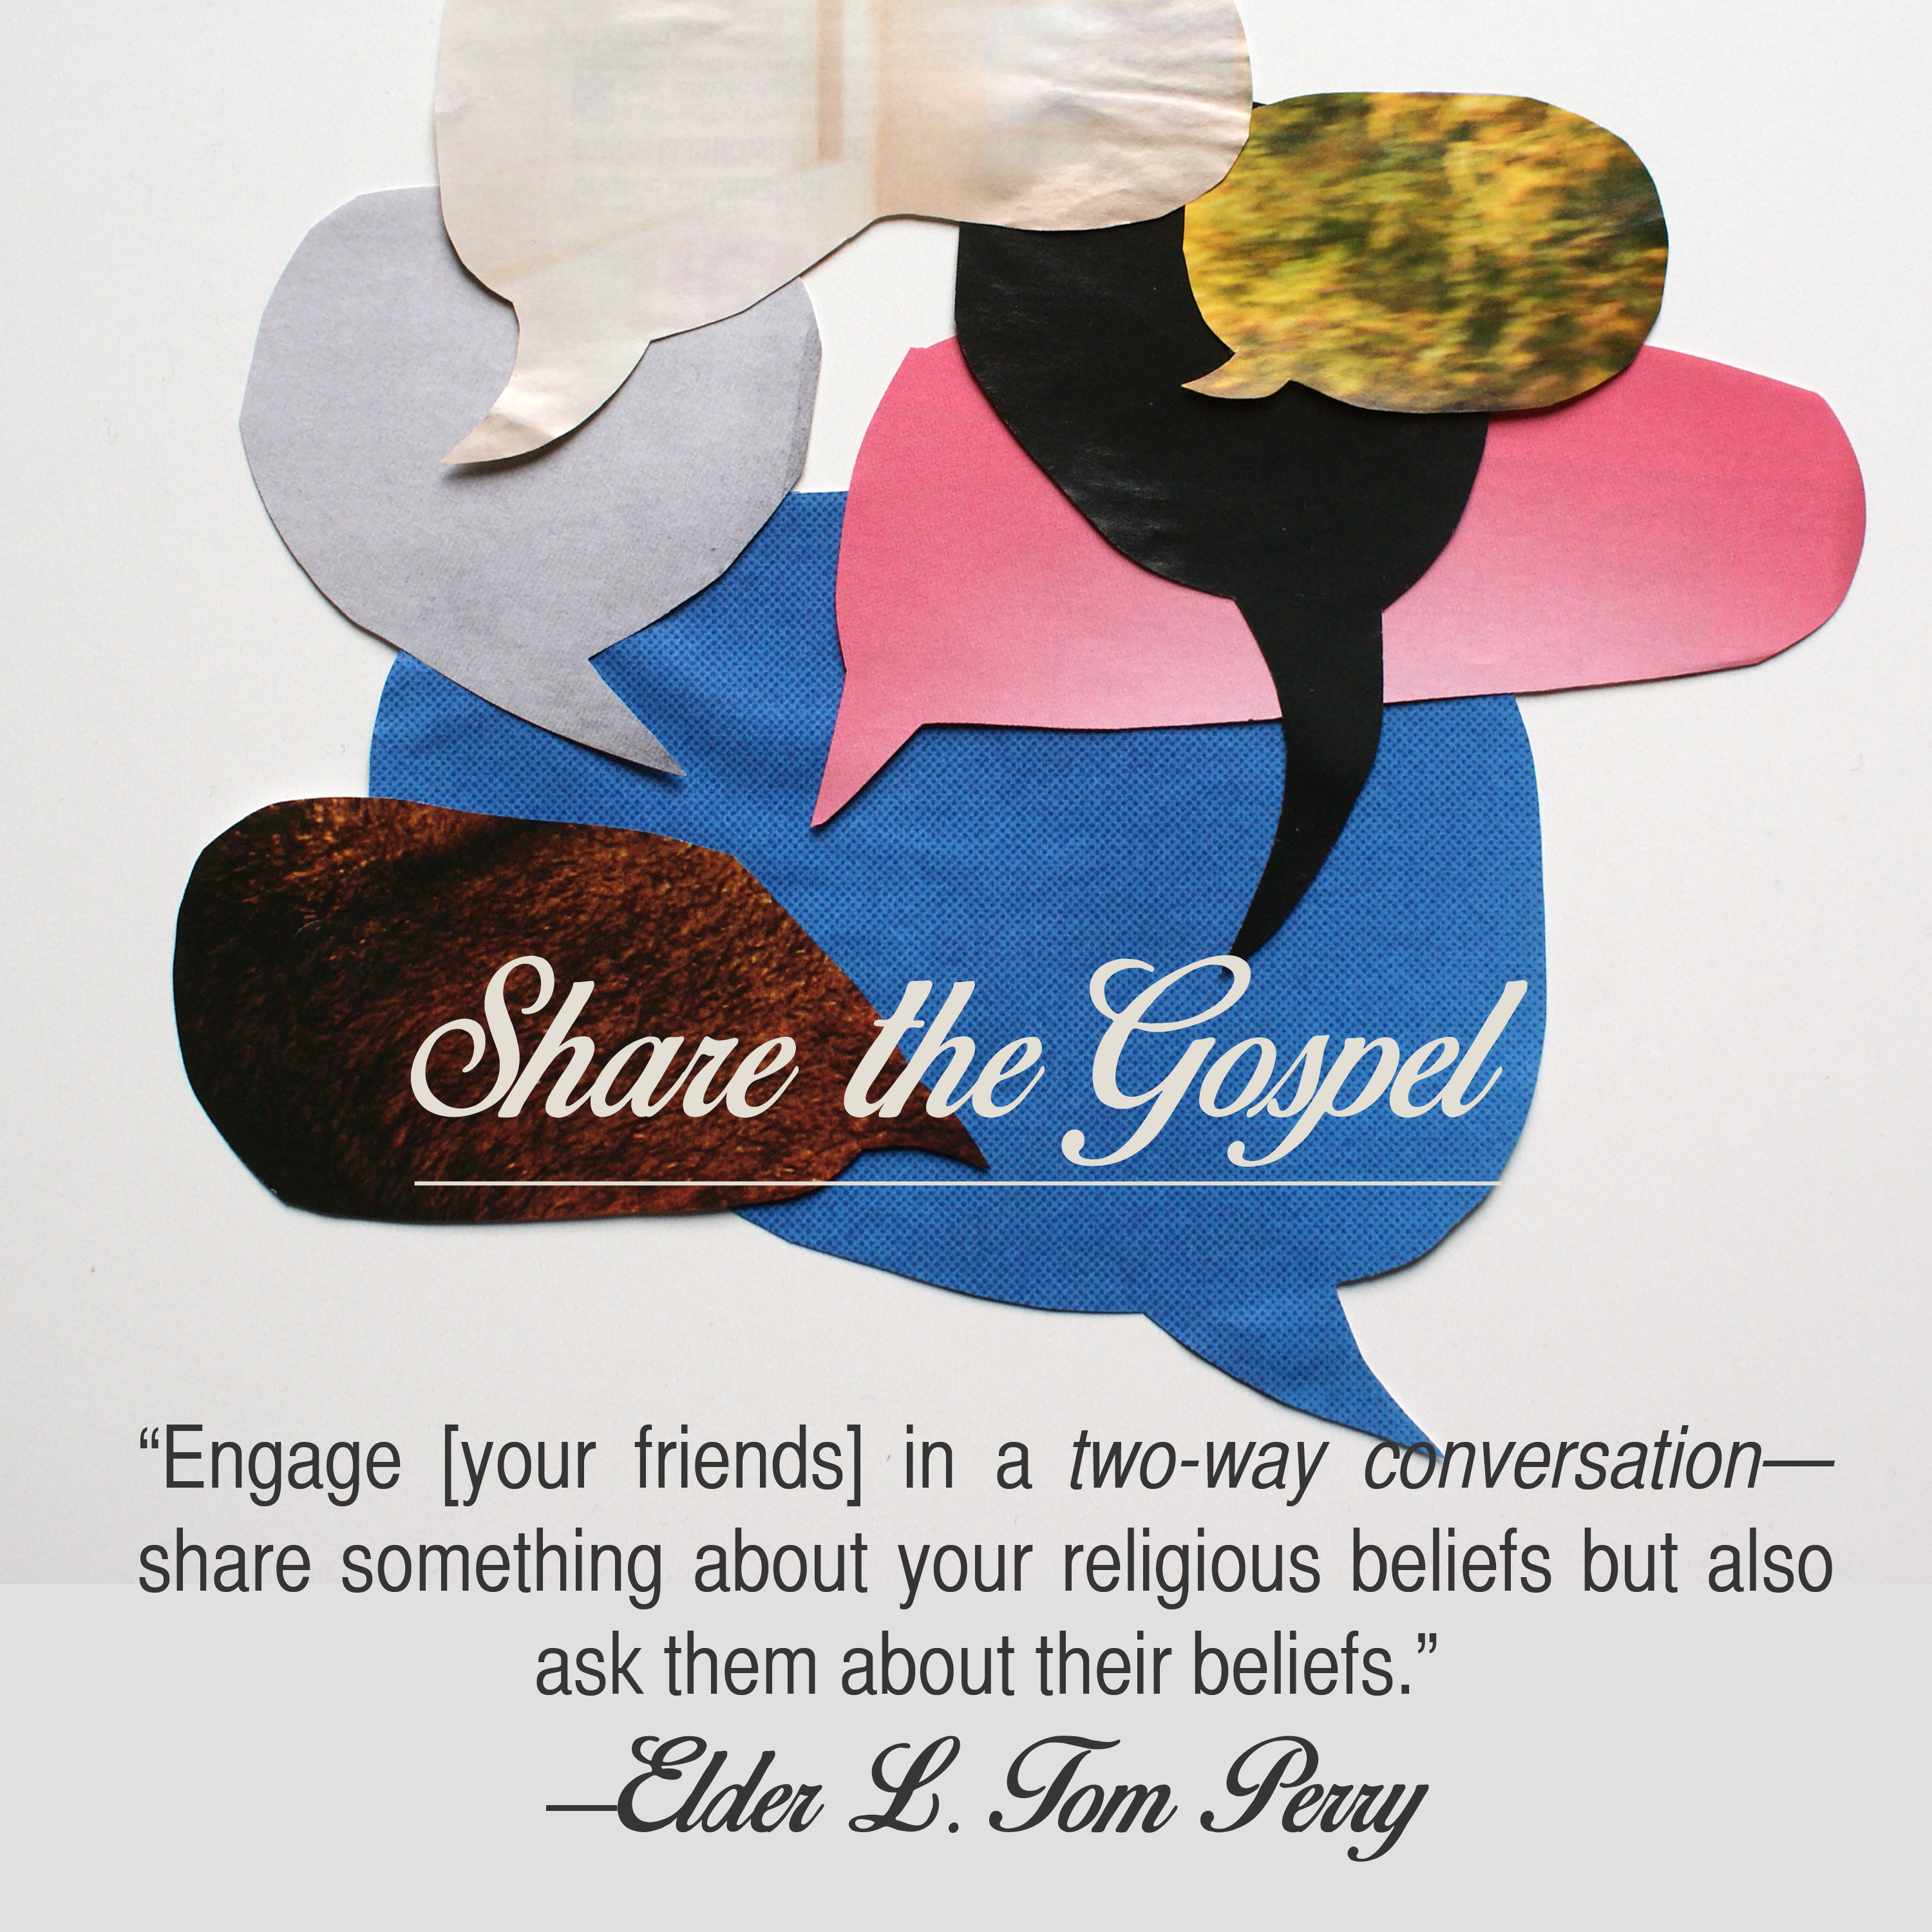 Share the Gospel: "Engage [your friends[ in a two-way conversation"